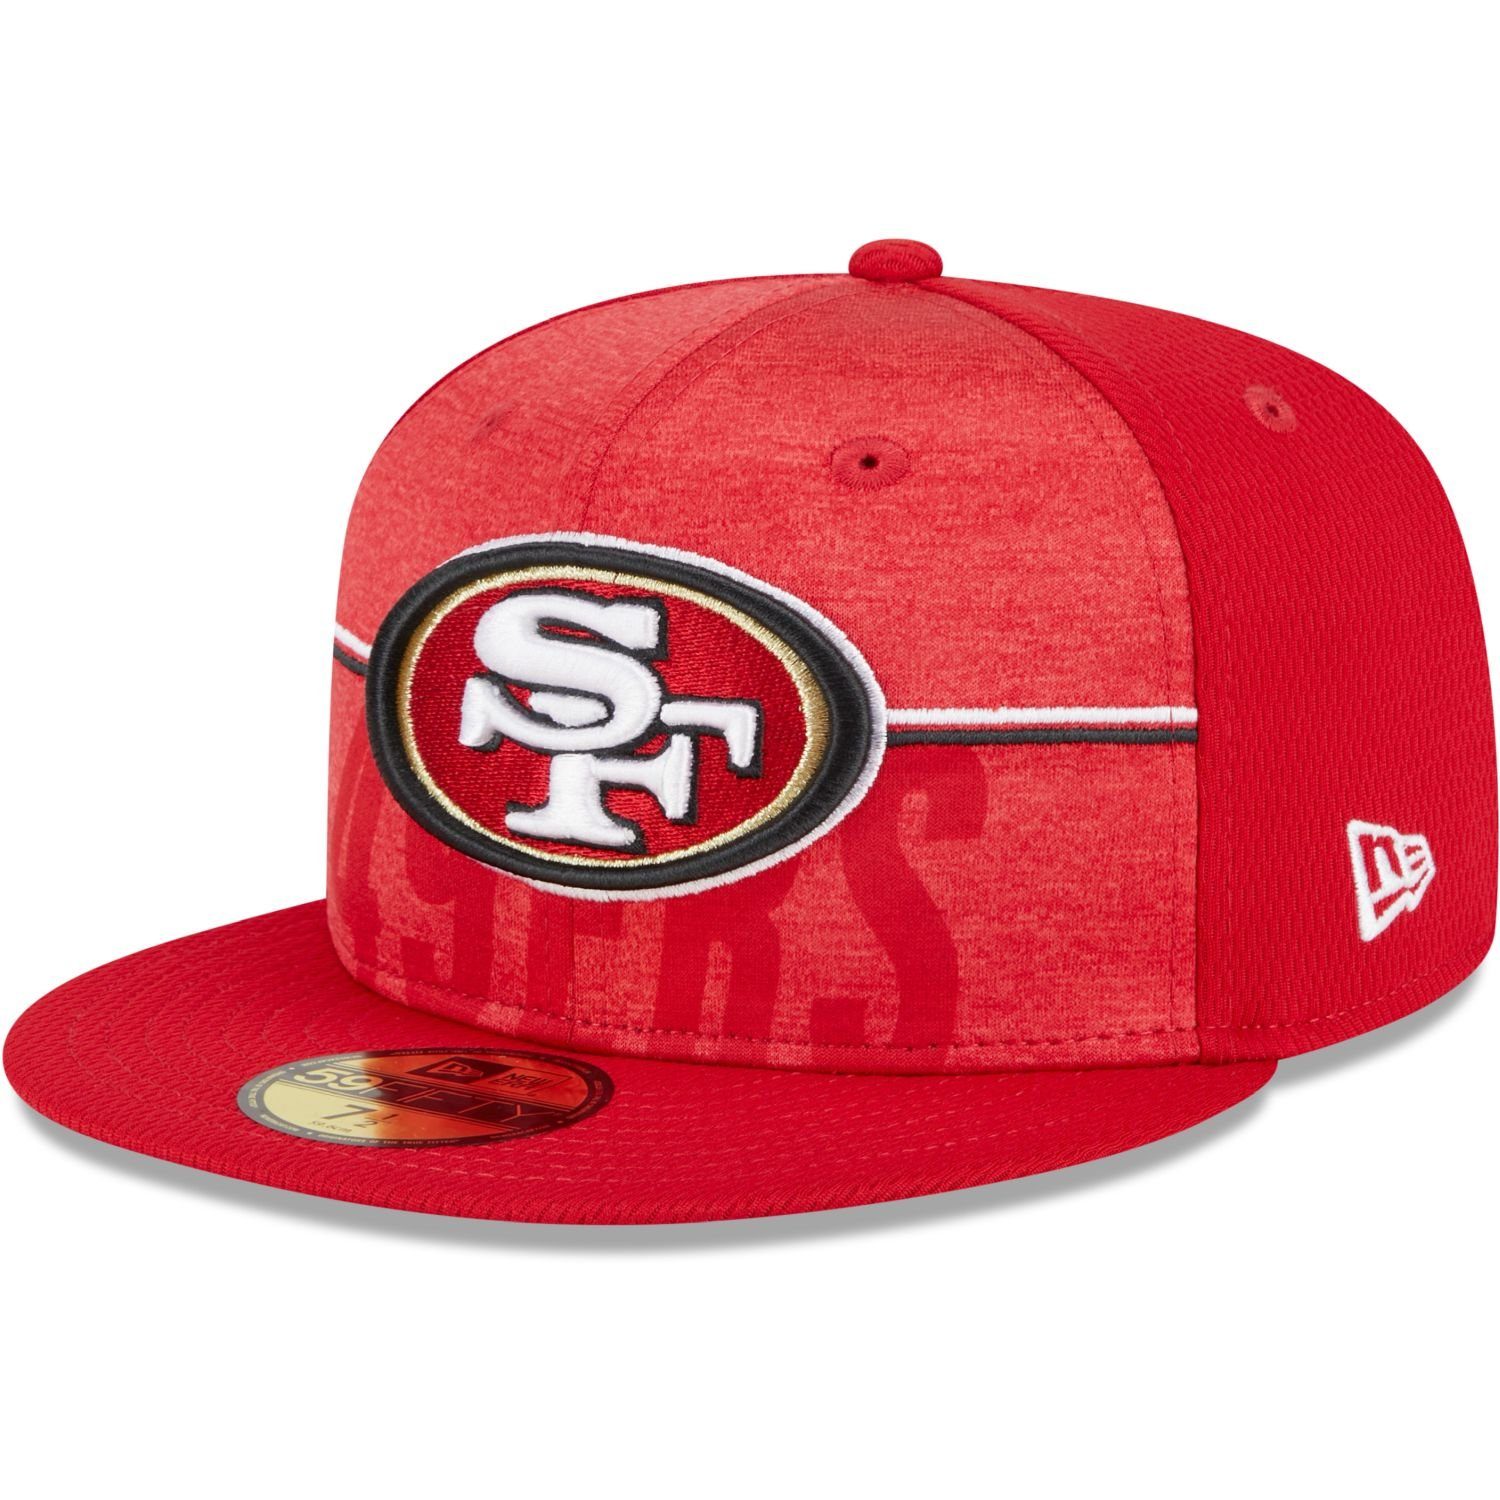 New Era Fitted Cap 59Fifty NFL TRAINING San Francisco 49ers